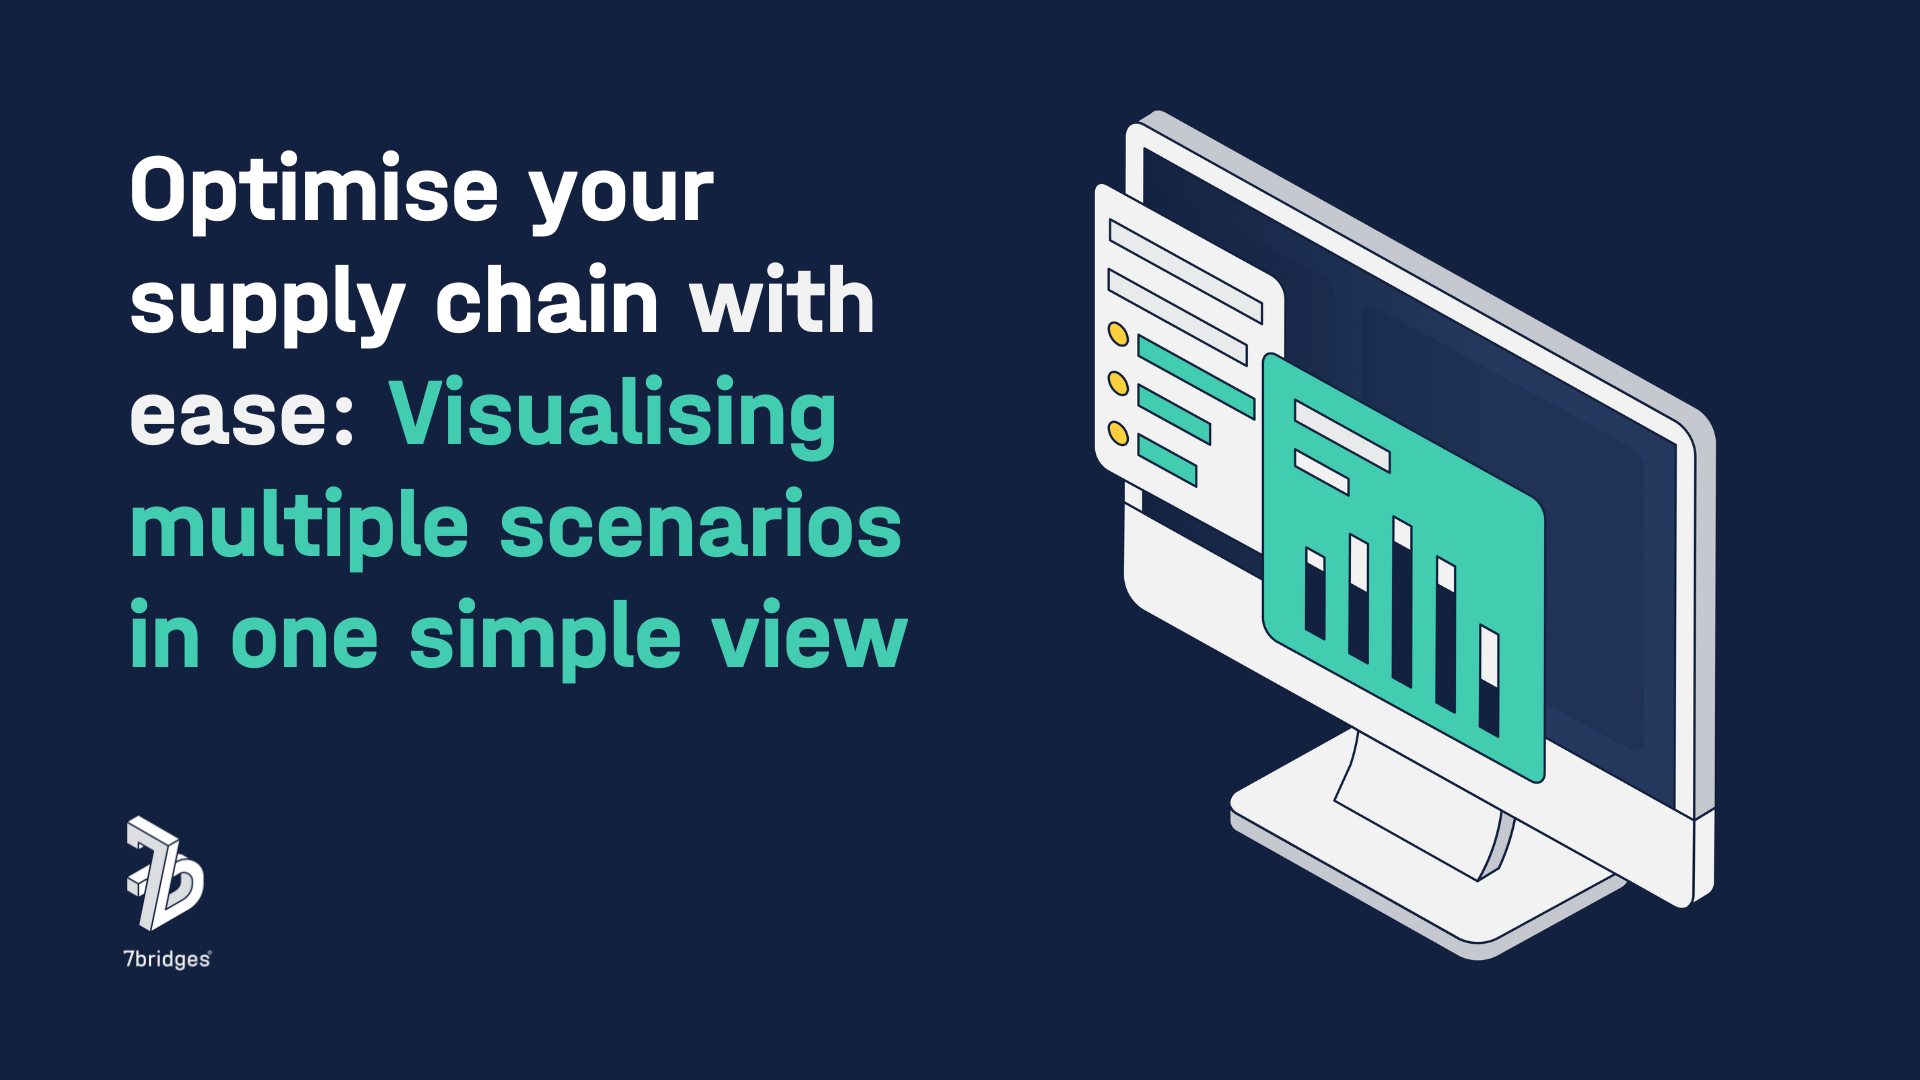 Optimise your supply chain with ease: Visualising multiple scenarios in one simple view